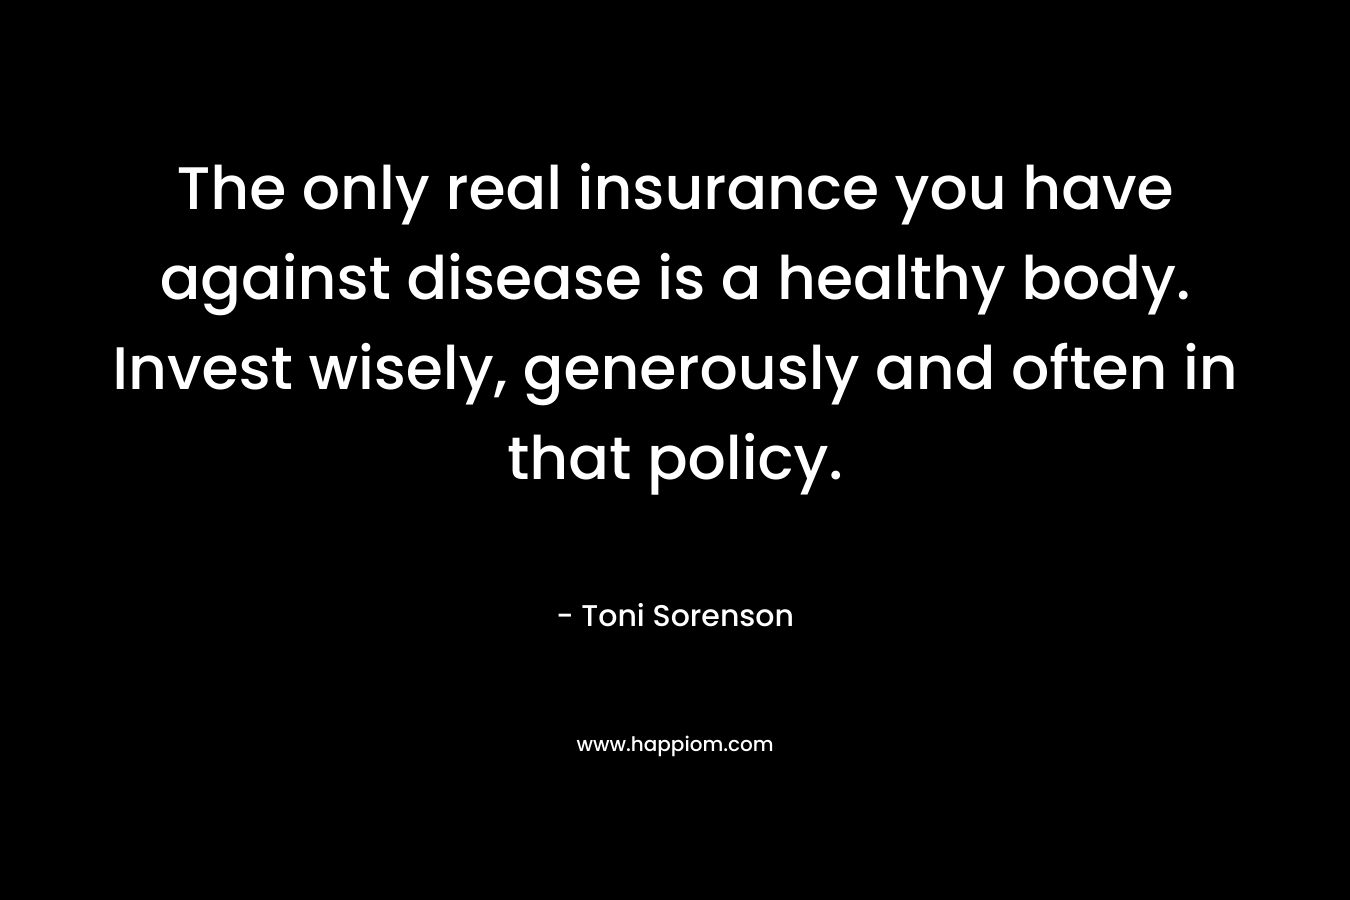 The only real insurance you have against disease is a healthy body. Invest wisely, generously and often in that policy. – Toni Sorenson